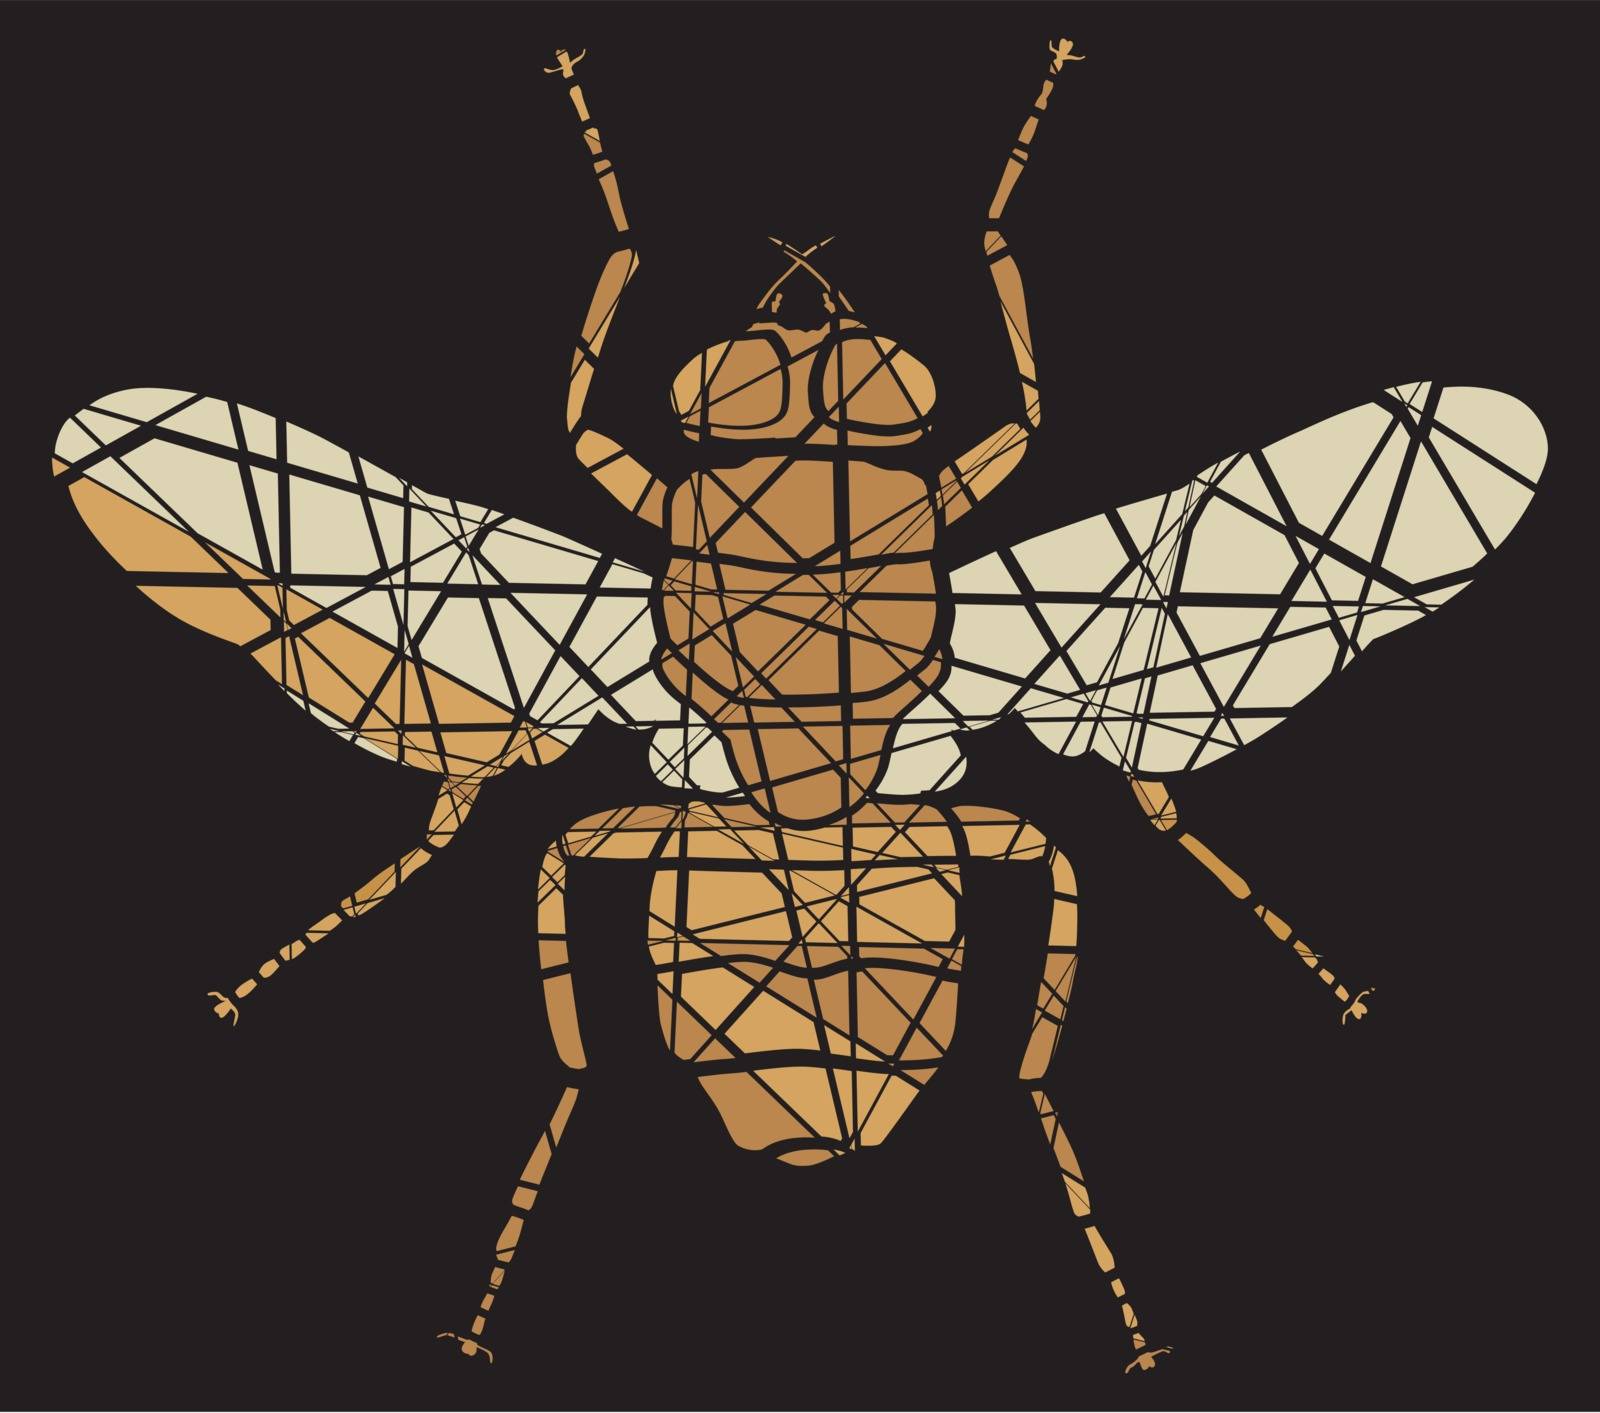 Editable vector shattered mosaic illustration of a fly